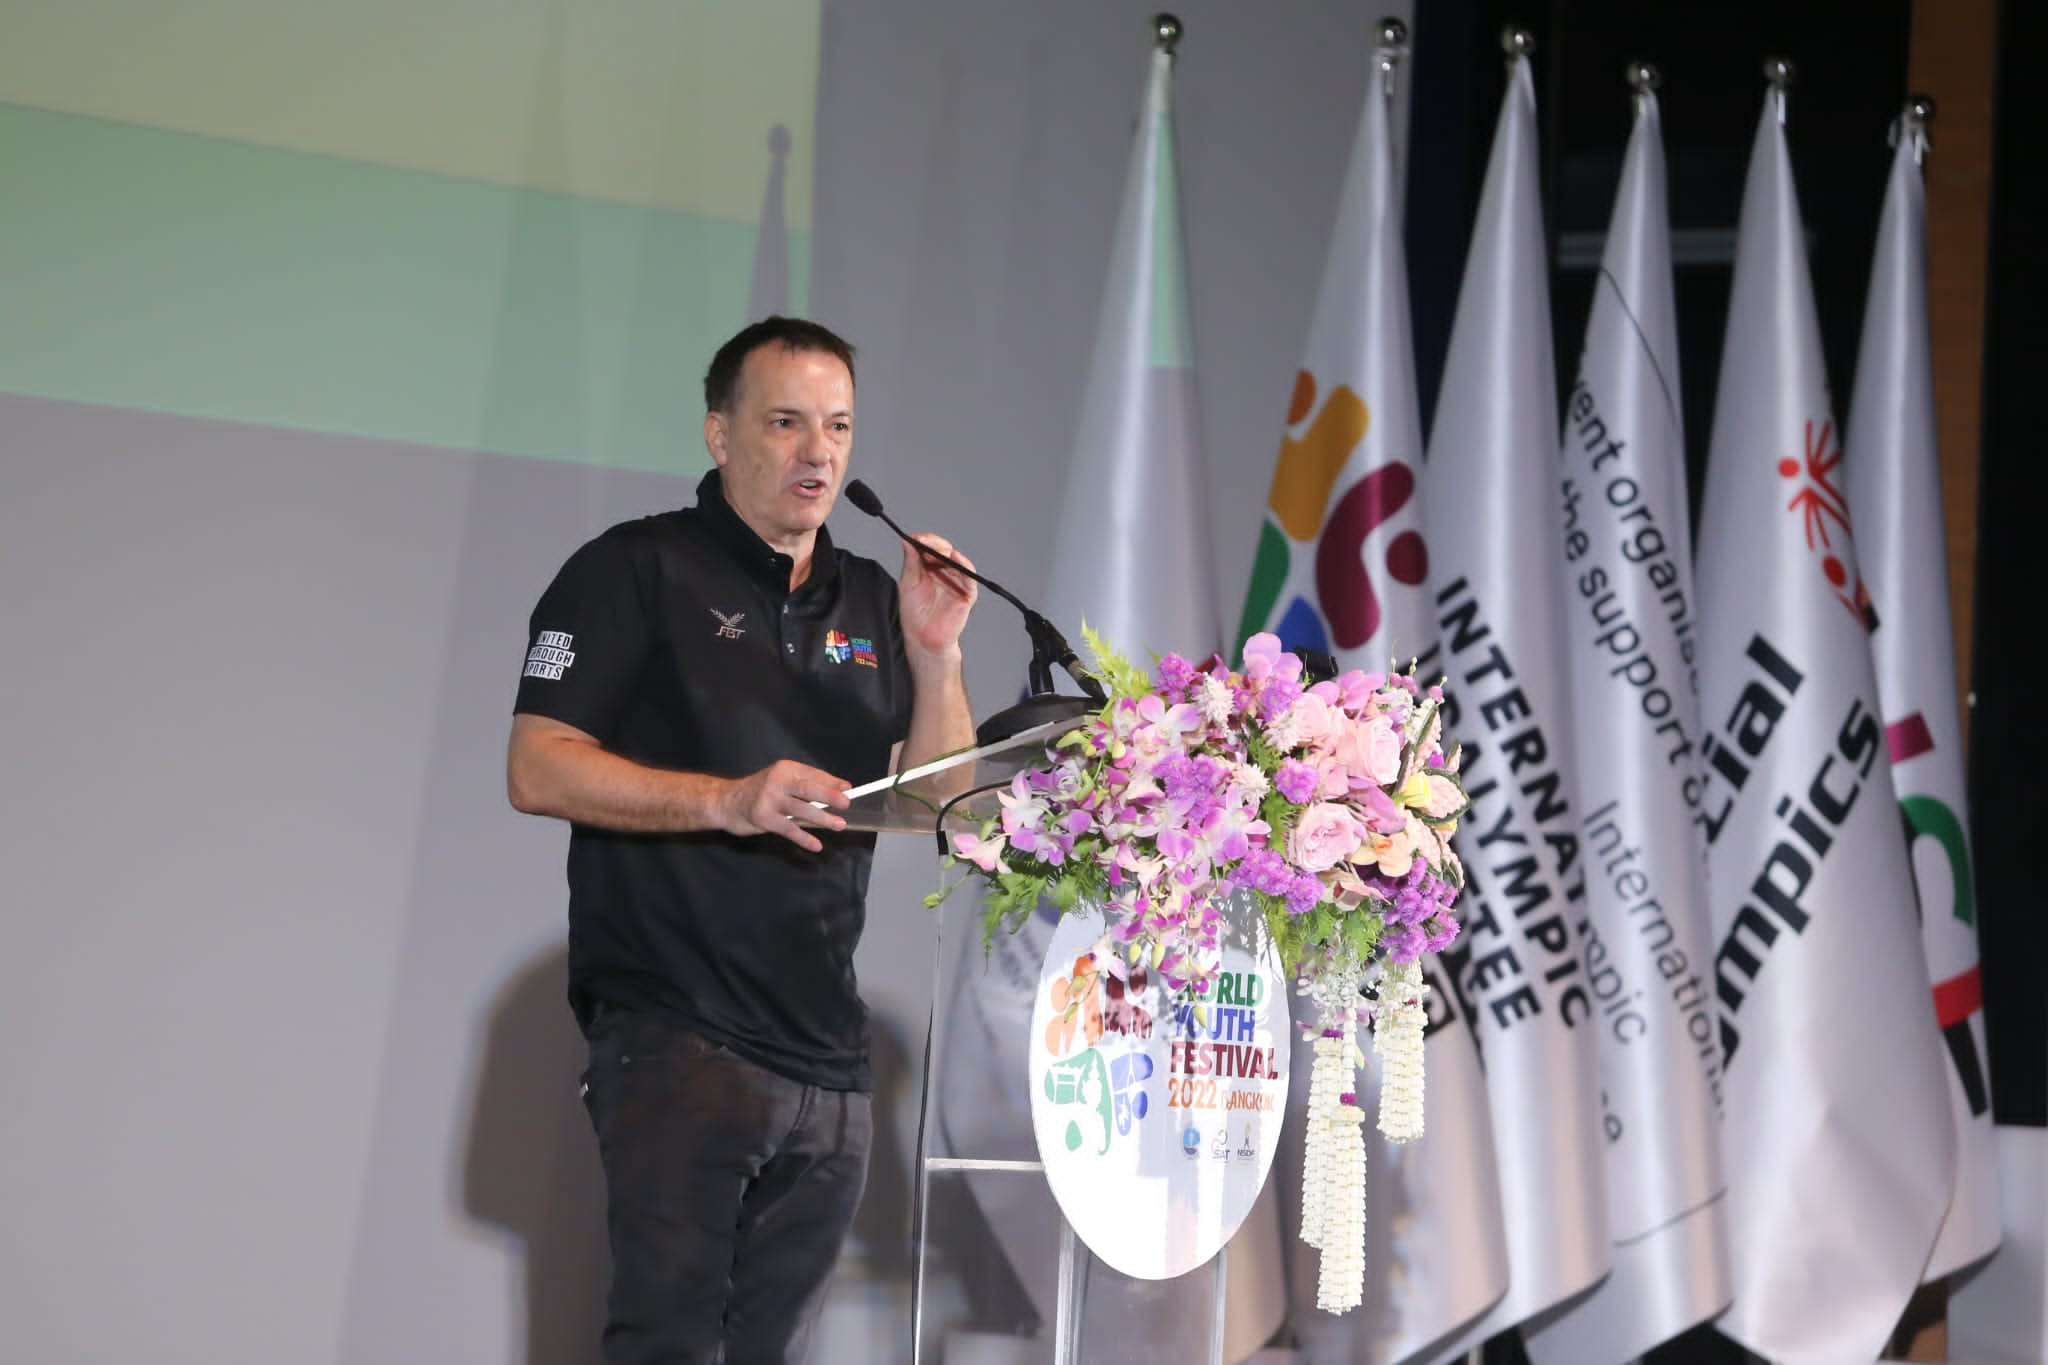 UTS President Stephan Fox addressed the gathering during the morning session ©UTS